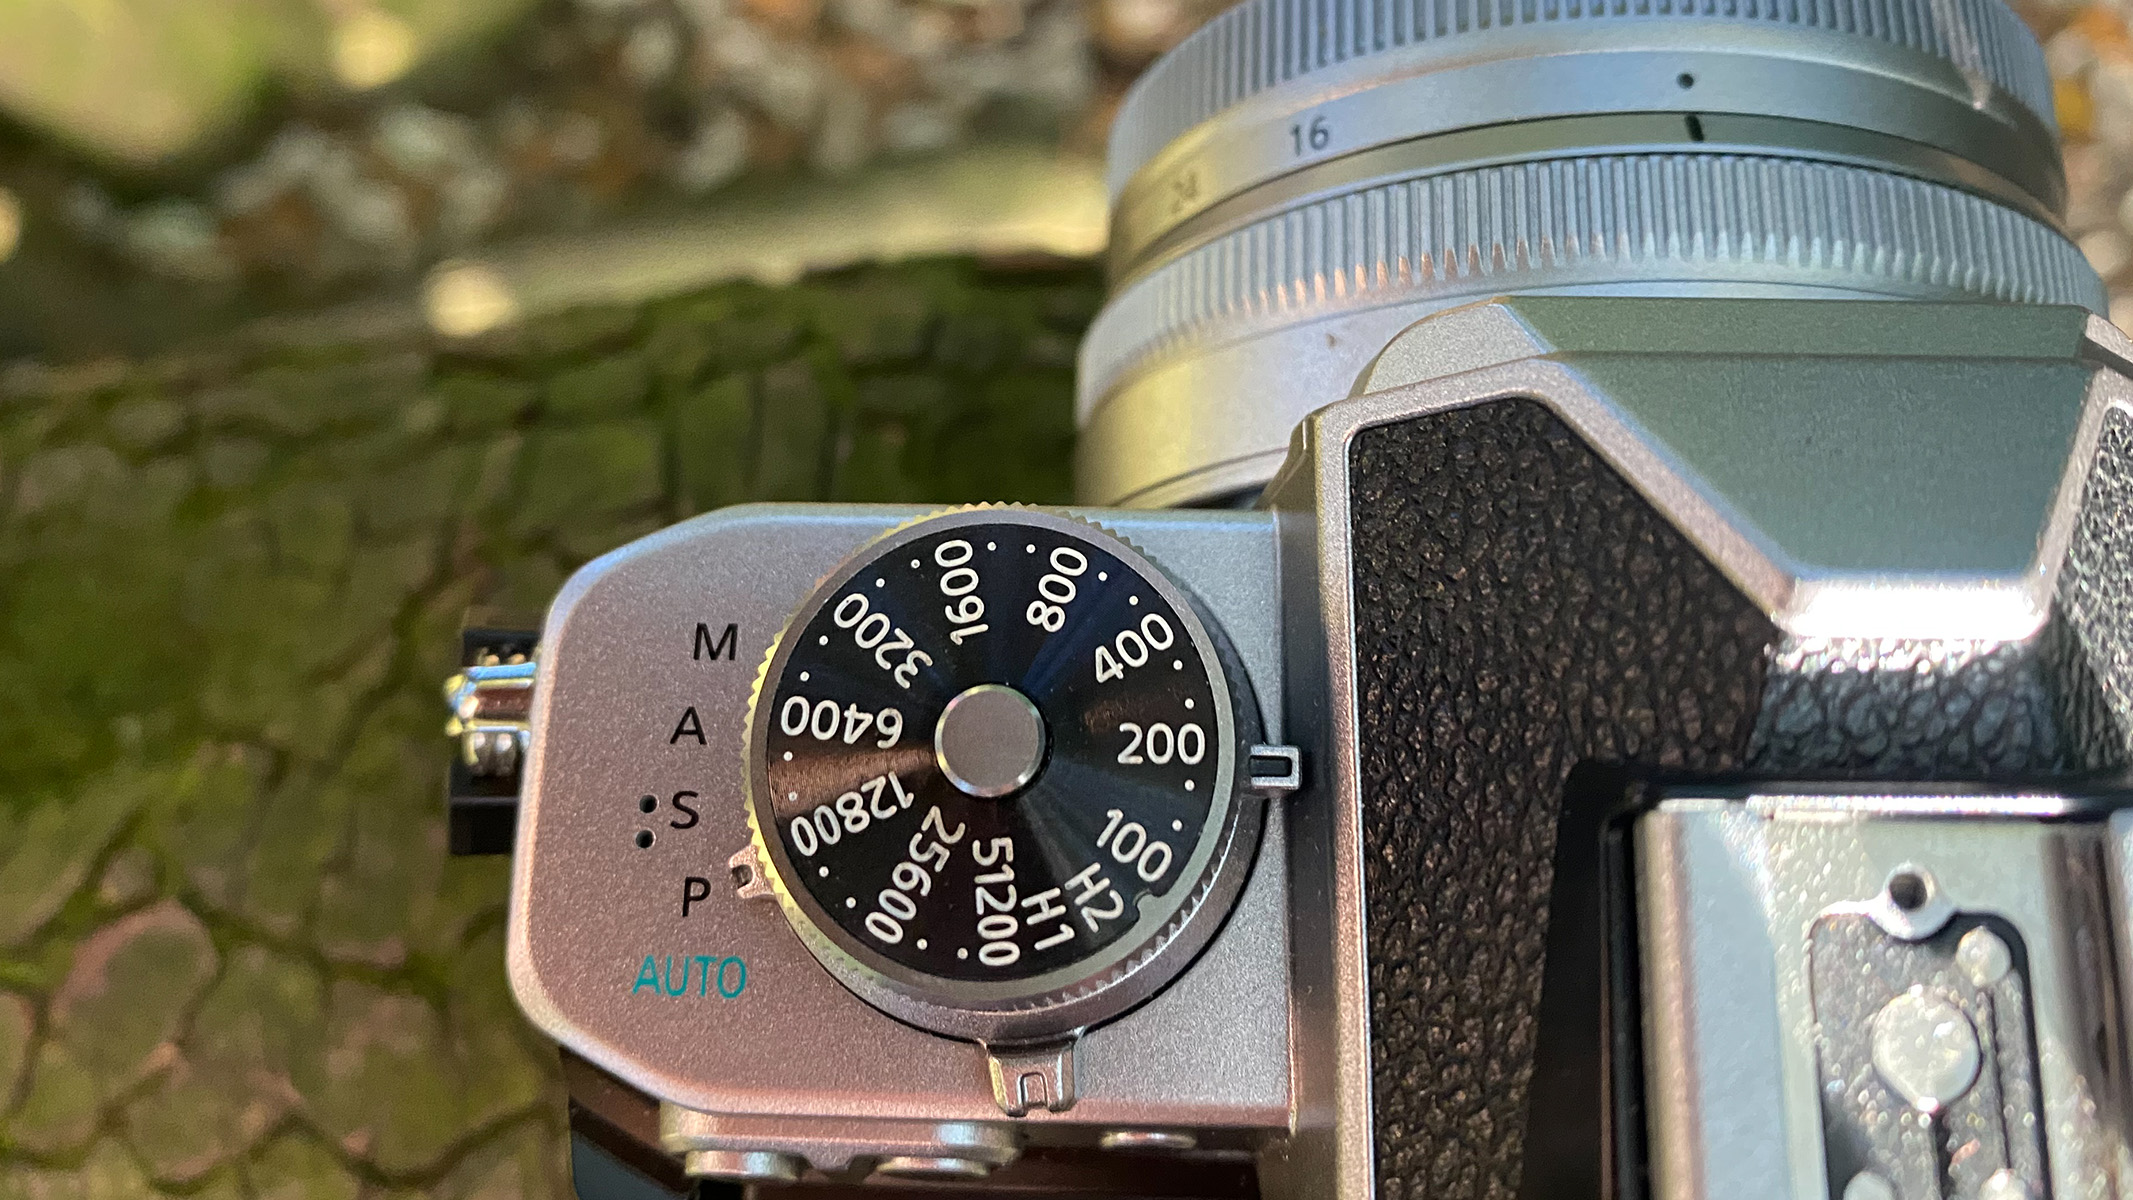 The image shows the ISO control on the top left of the camera